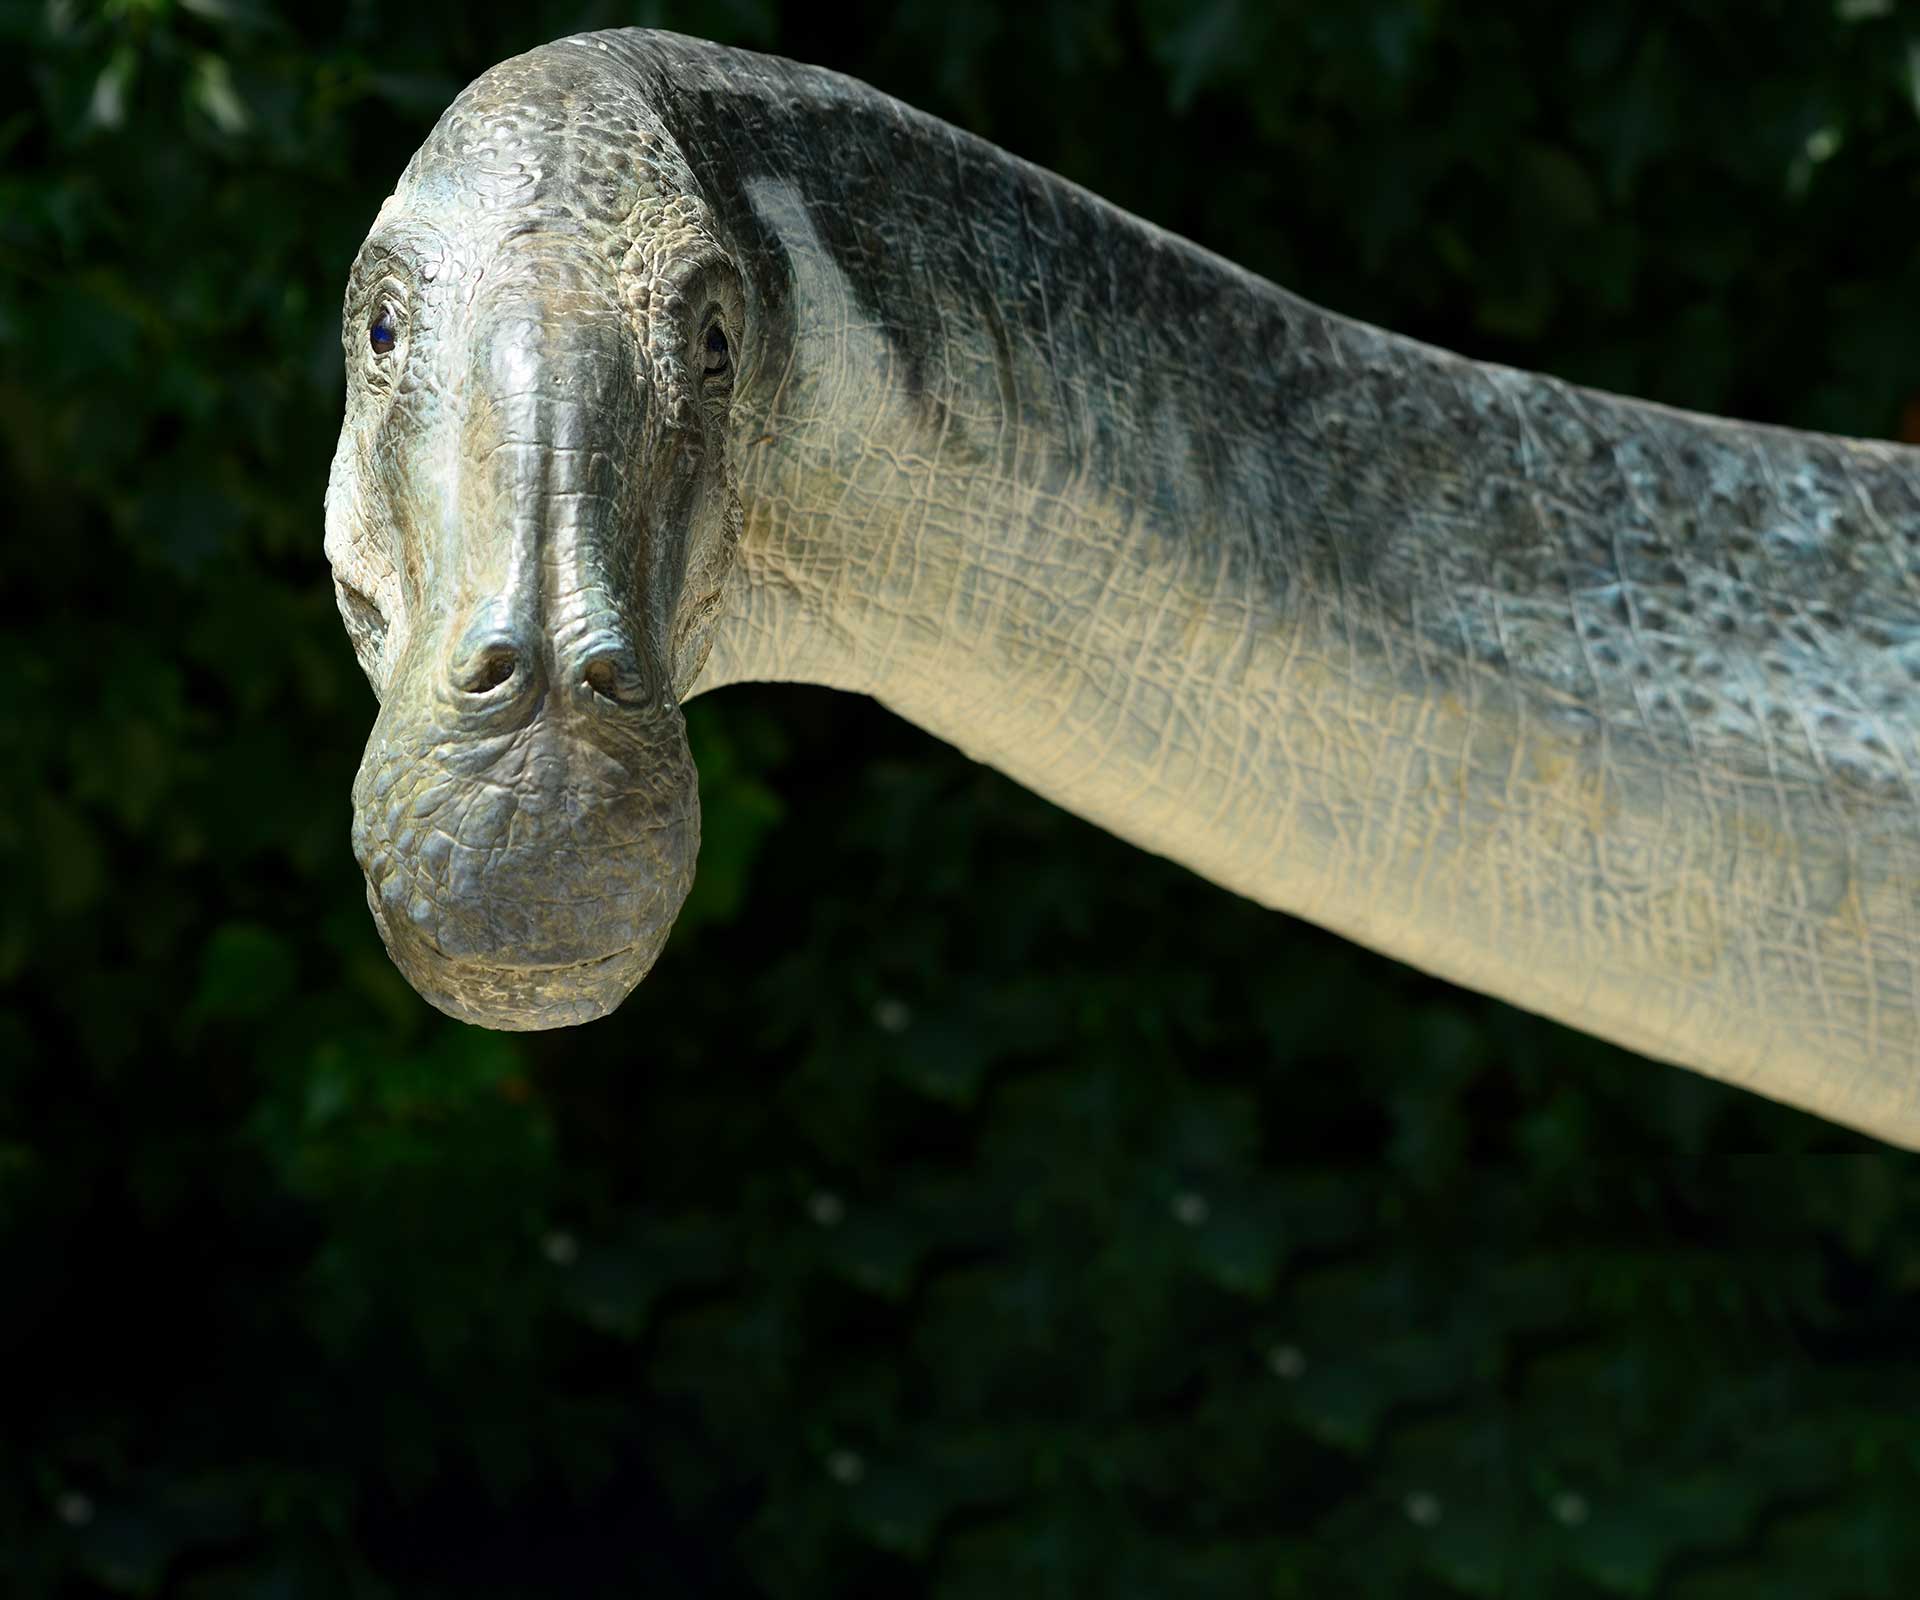 The Mokele-Mbembe: Could a Dinosaur-Like Creature Still Roam the Congo?